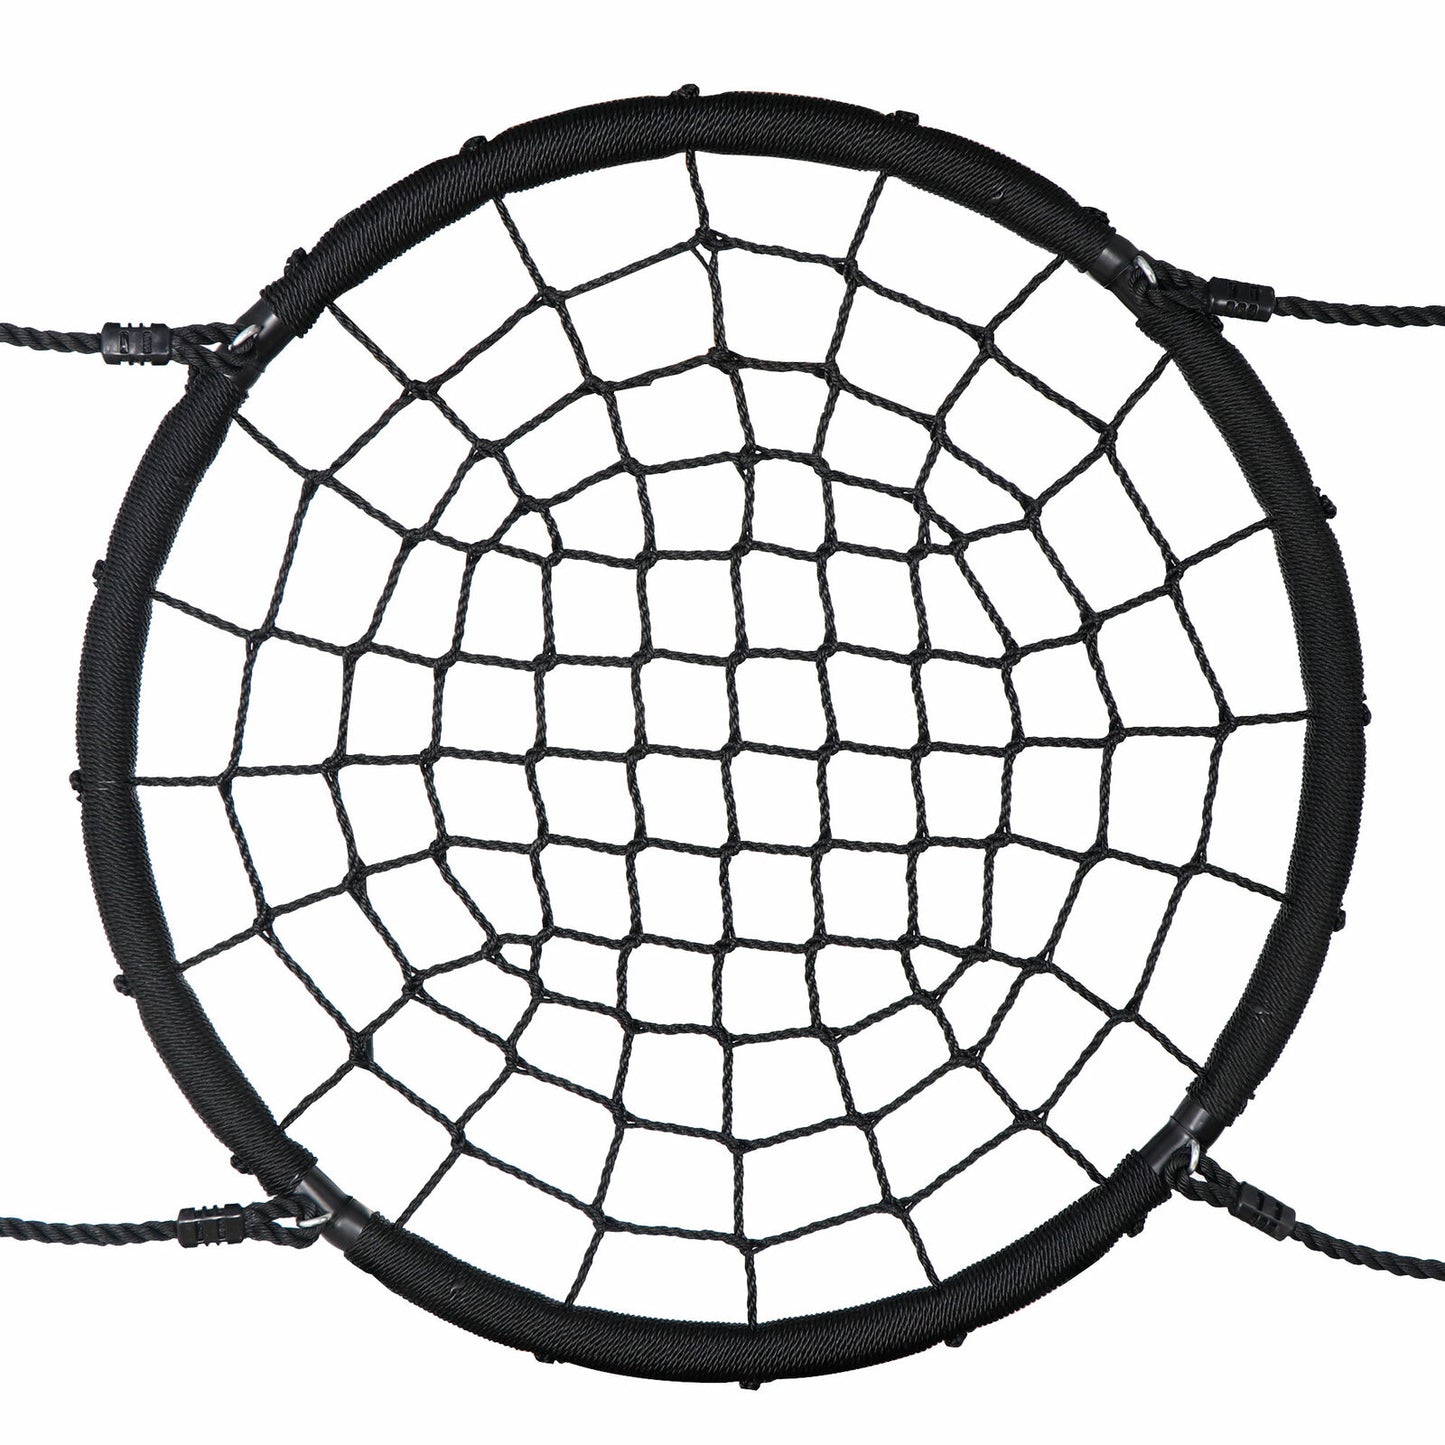 48'' Spider Web Tree Swing Net For Kids Adjustable Height Max Weight 600Lbs